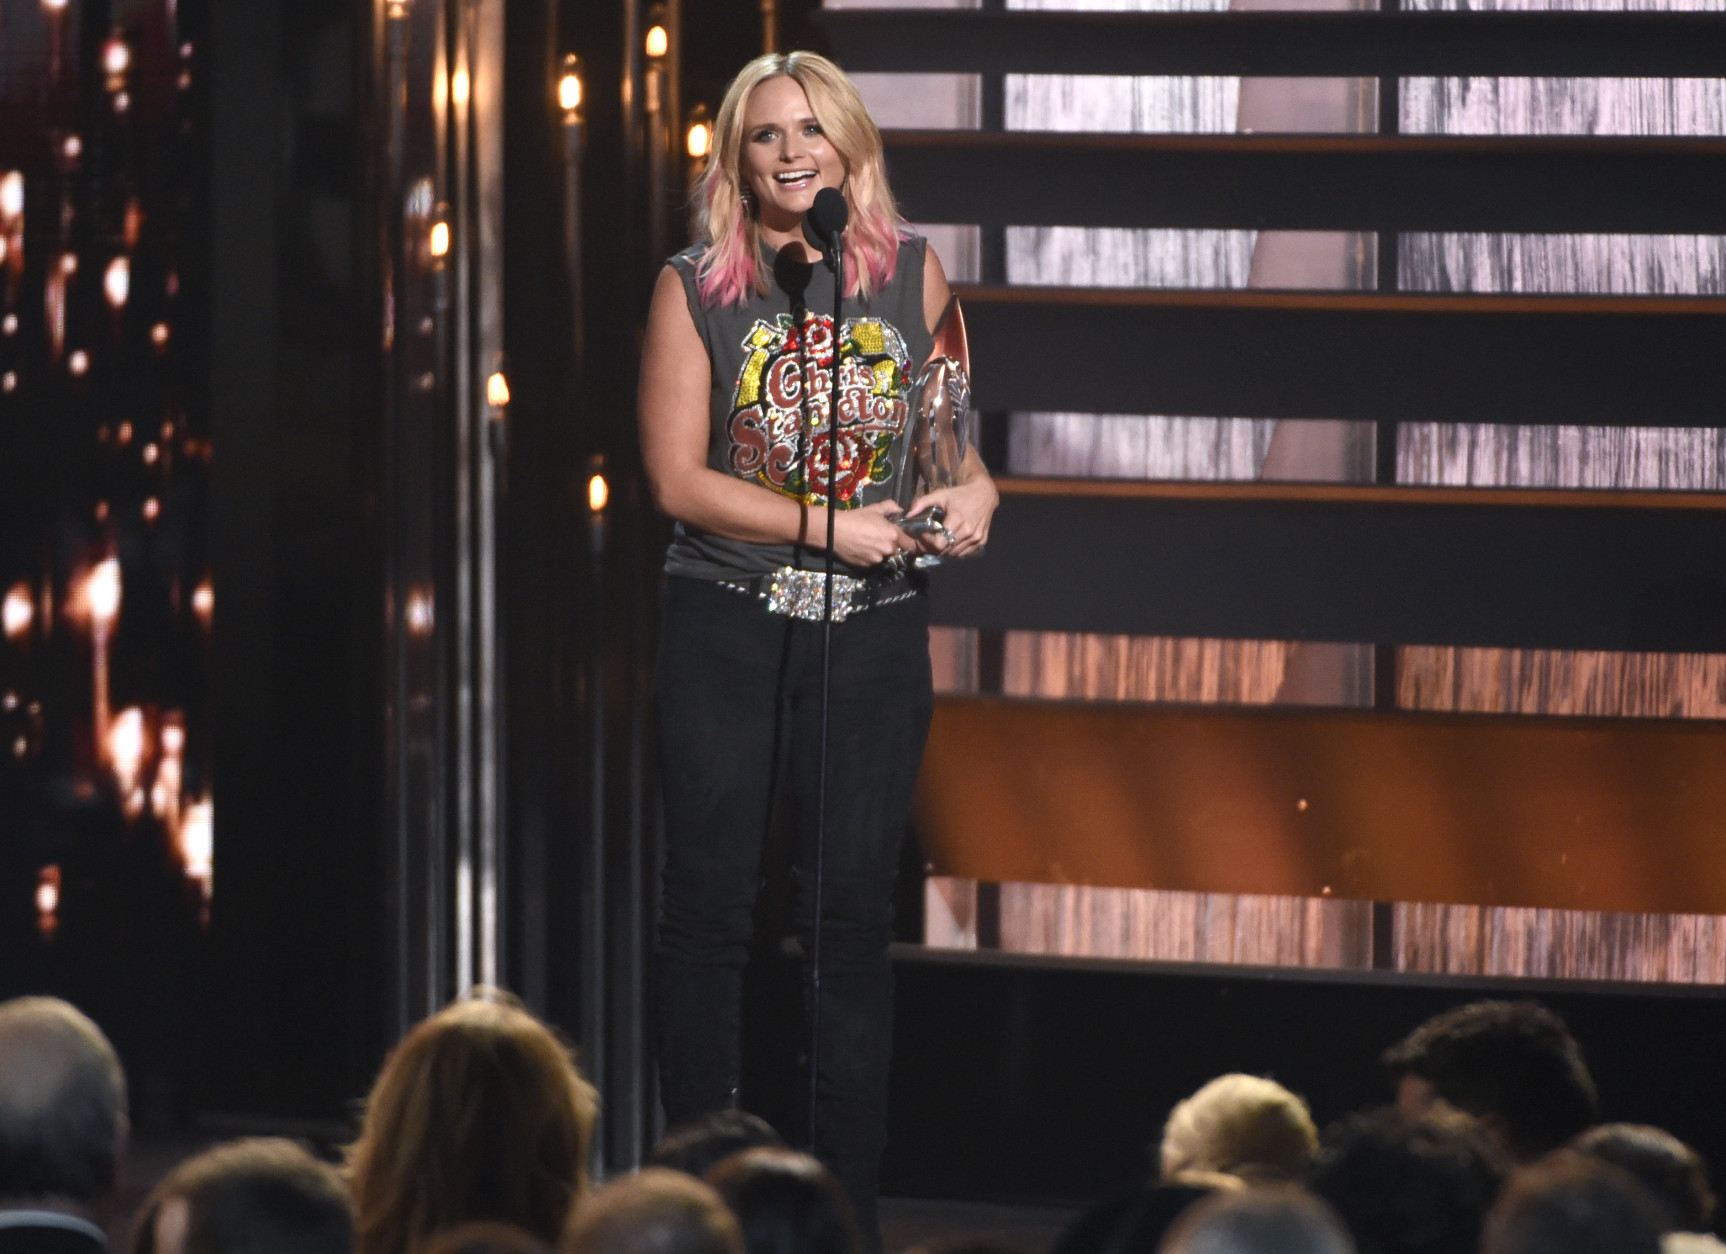 Miranda Lambert accepts the award for female vocalist of the year at the 49th annual CMA Awards at the Bridgestone Arena on Wednesday, Nov. 4, 2015, in Nashville, Tenn. (Photo by Chris Pizzello/Invision/AP)